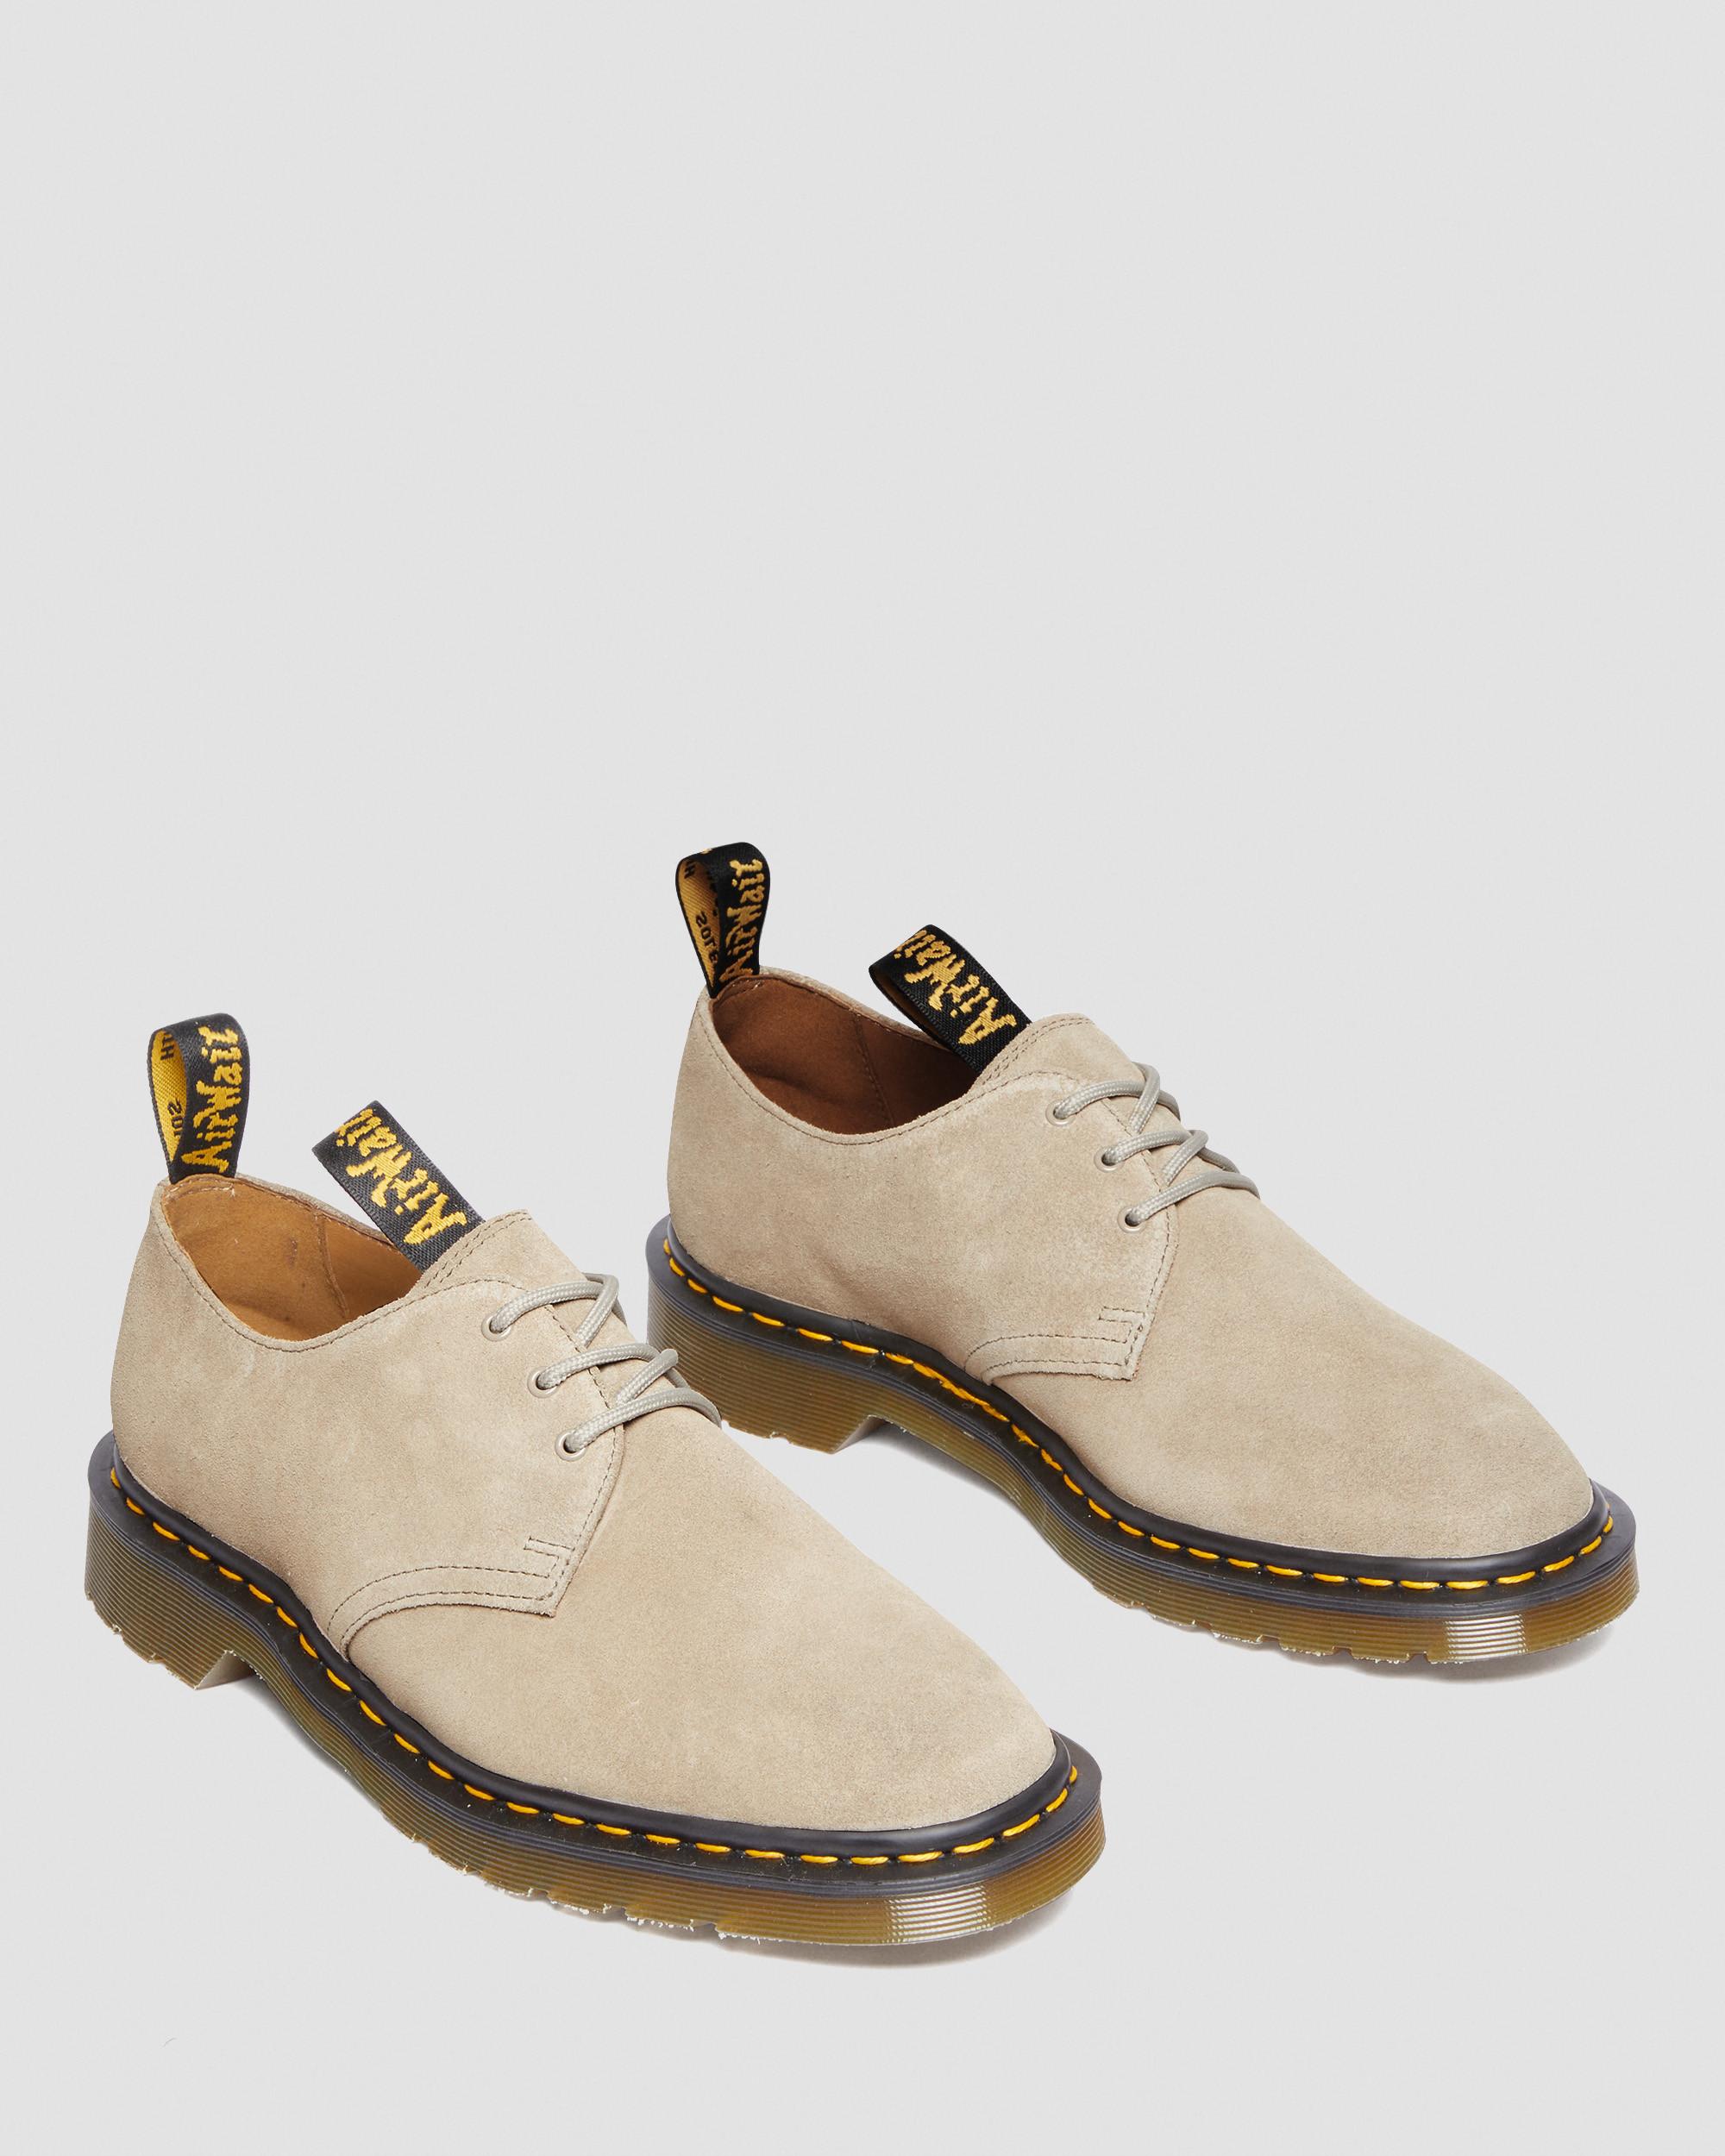 1461 Engineered Garments Suede Oxford Shoes1461 Engineered Garments Suede Oxford Shoes   Dr. Martens